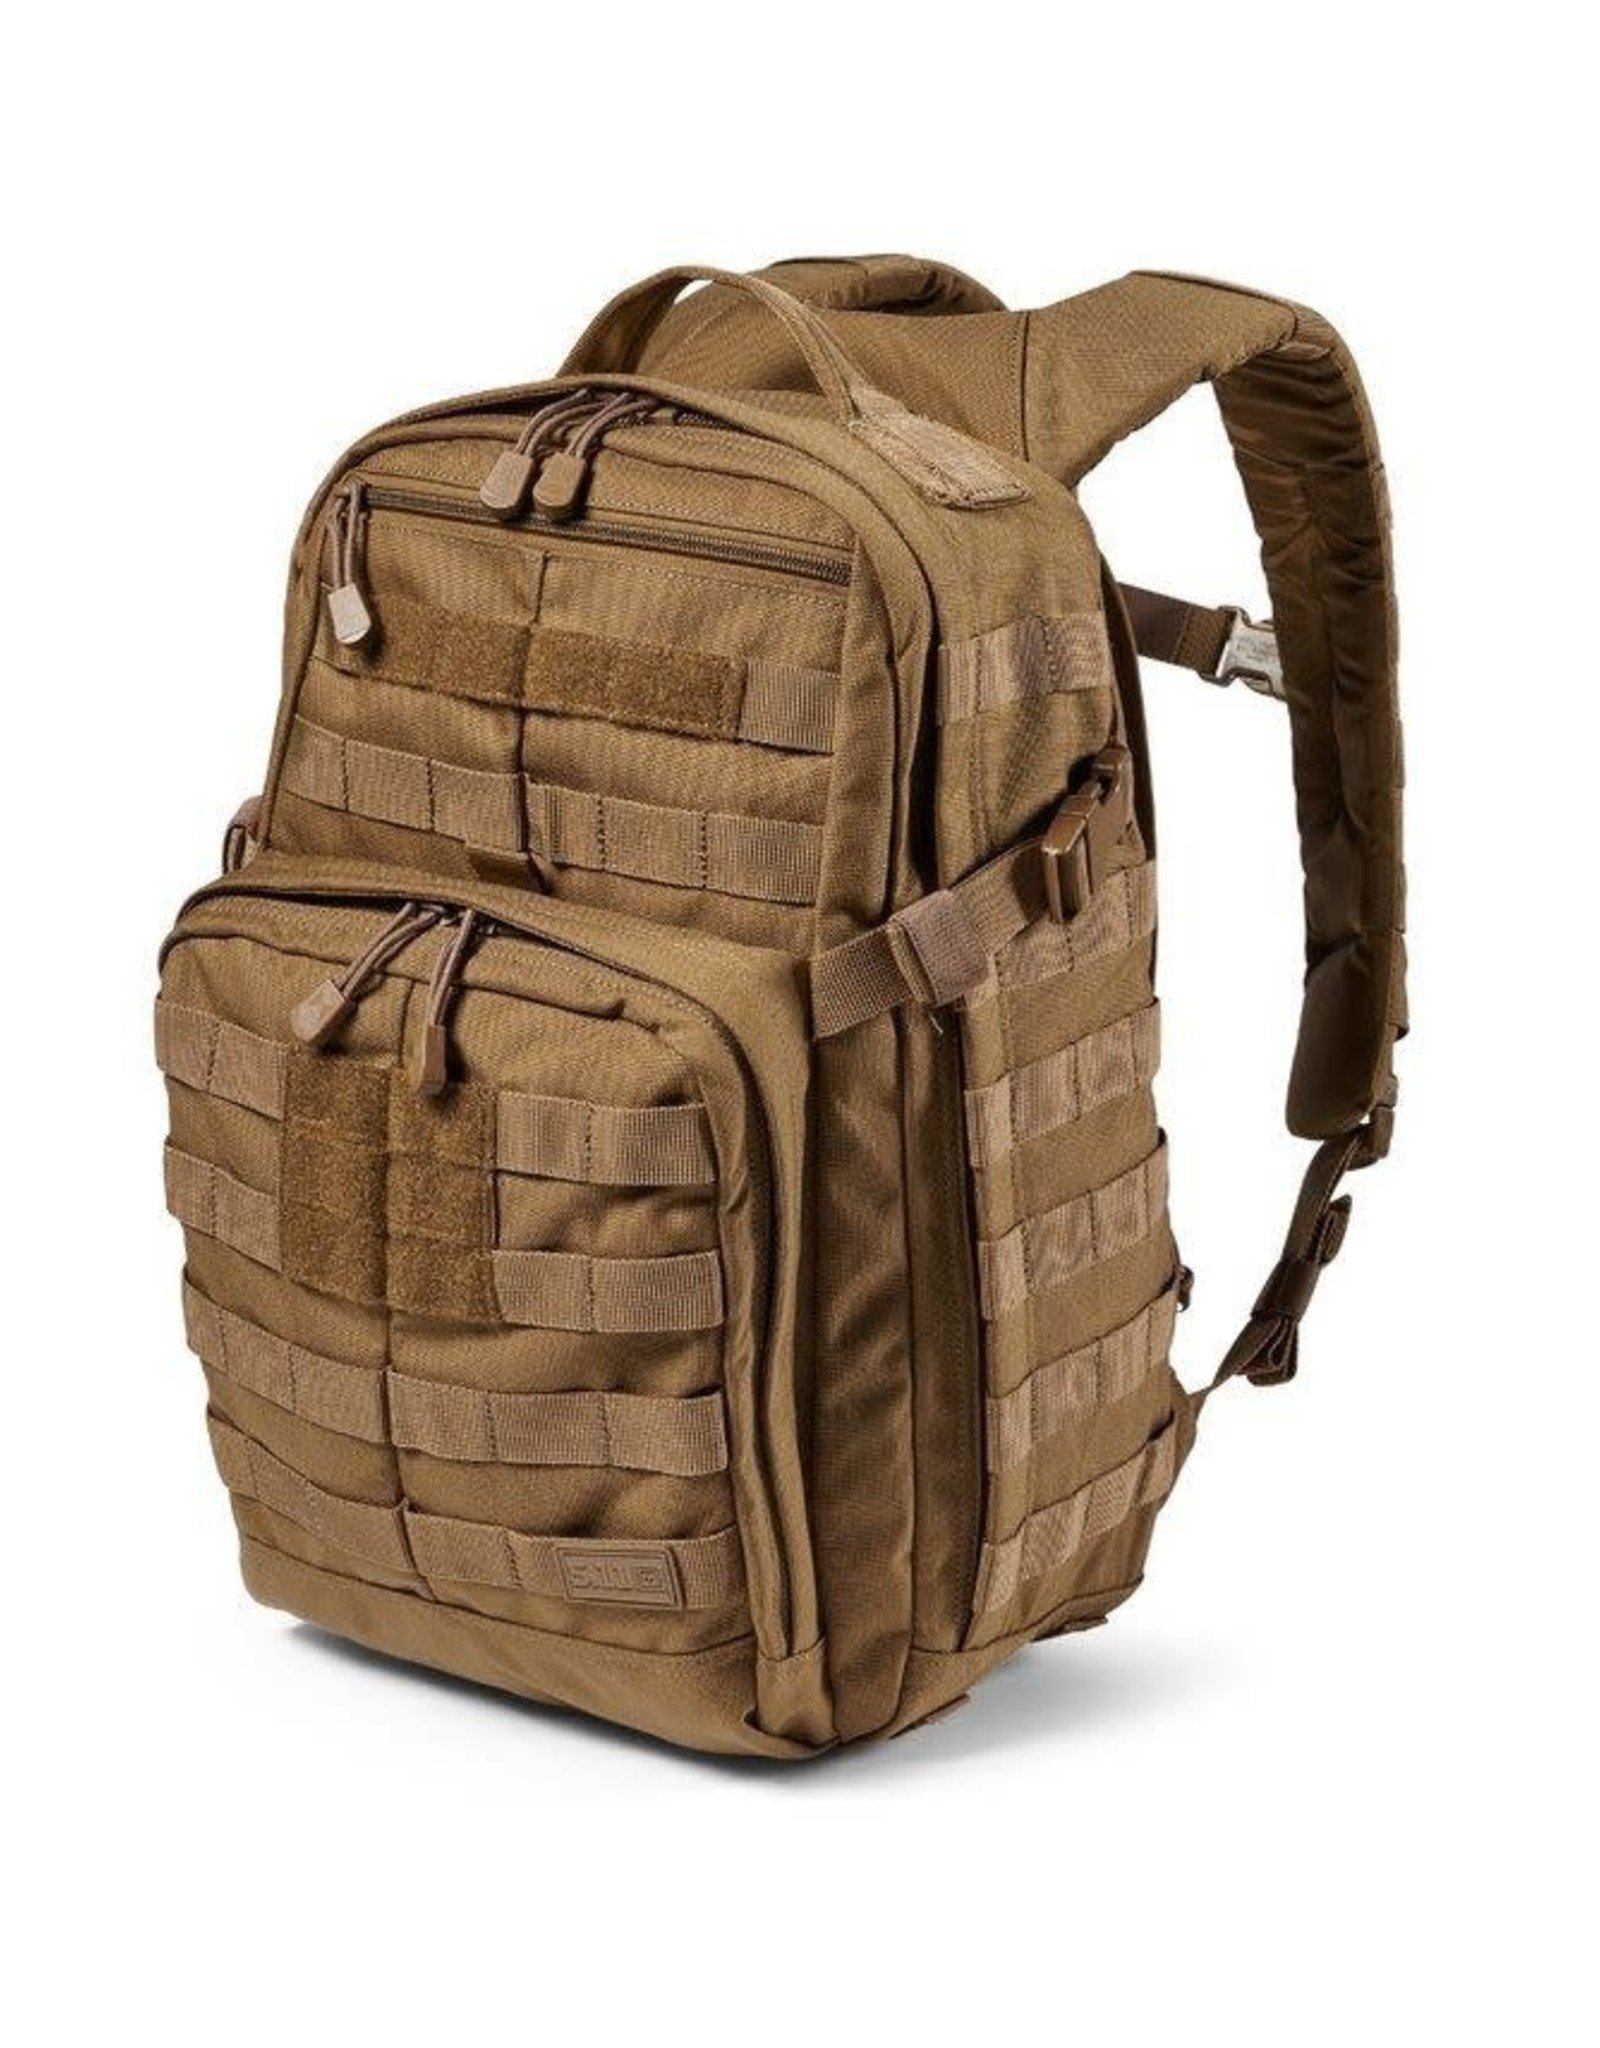 5.11 Tactical Rush12 2.0 Backpack